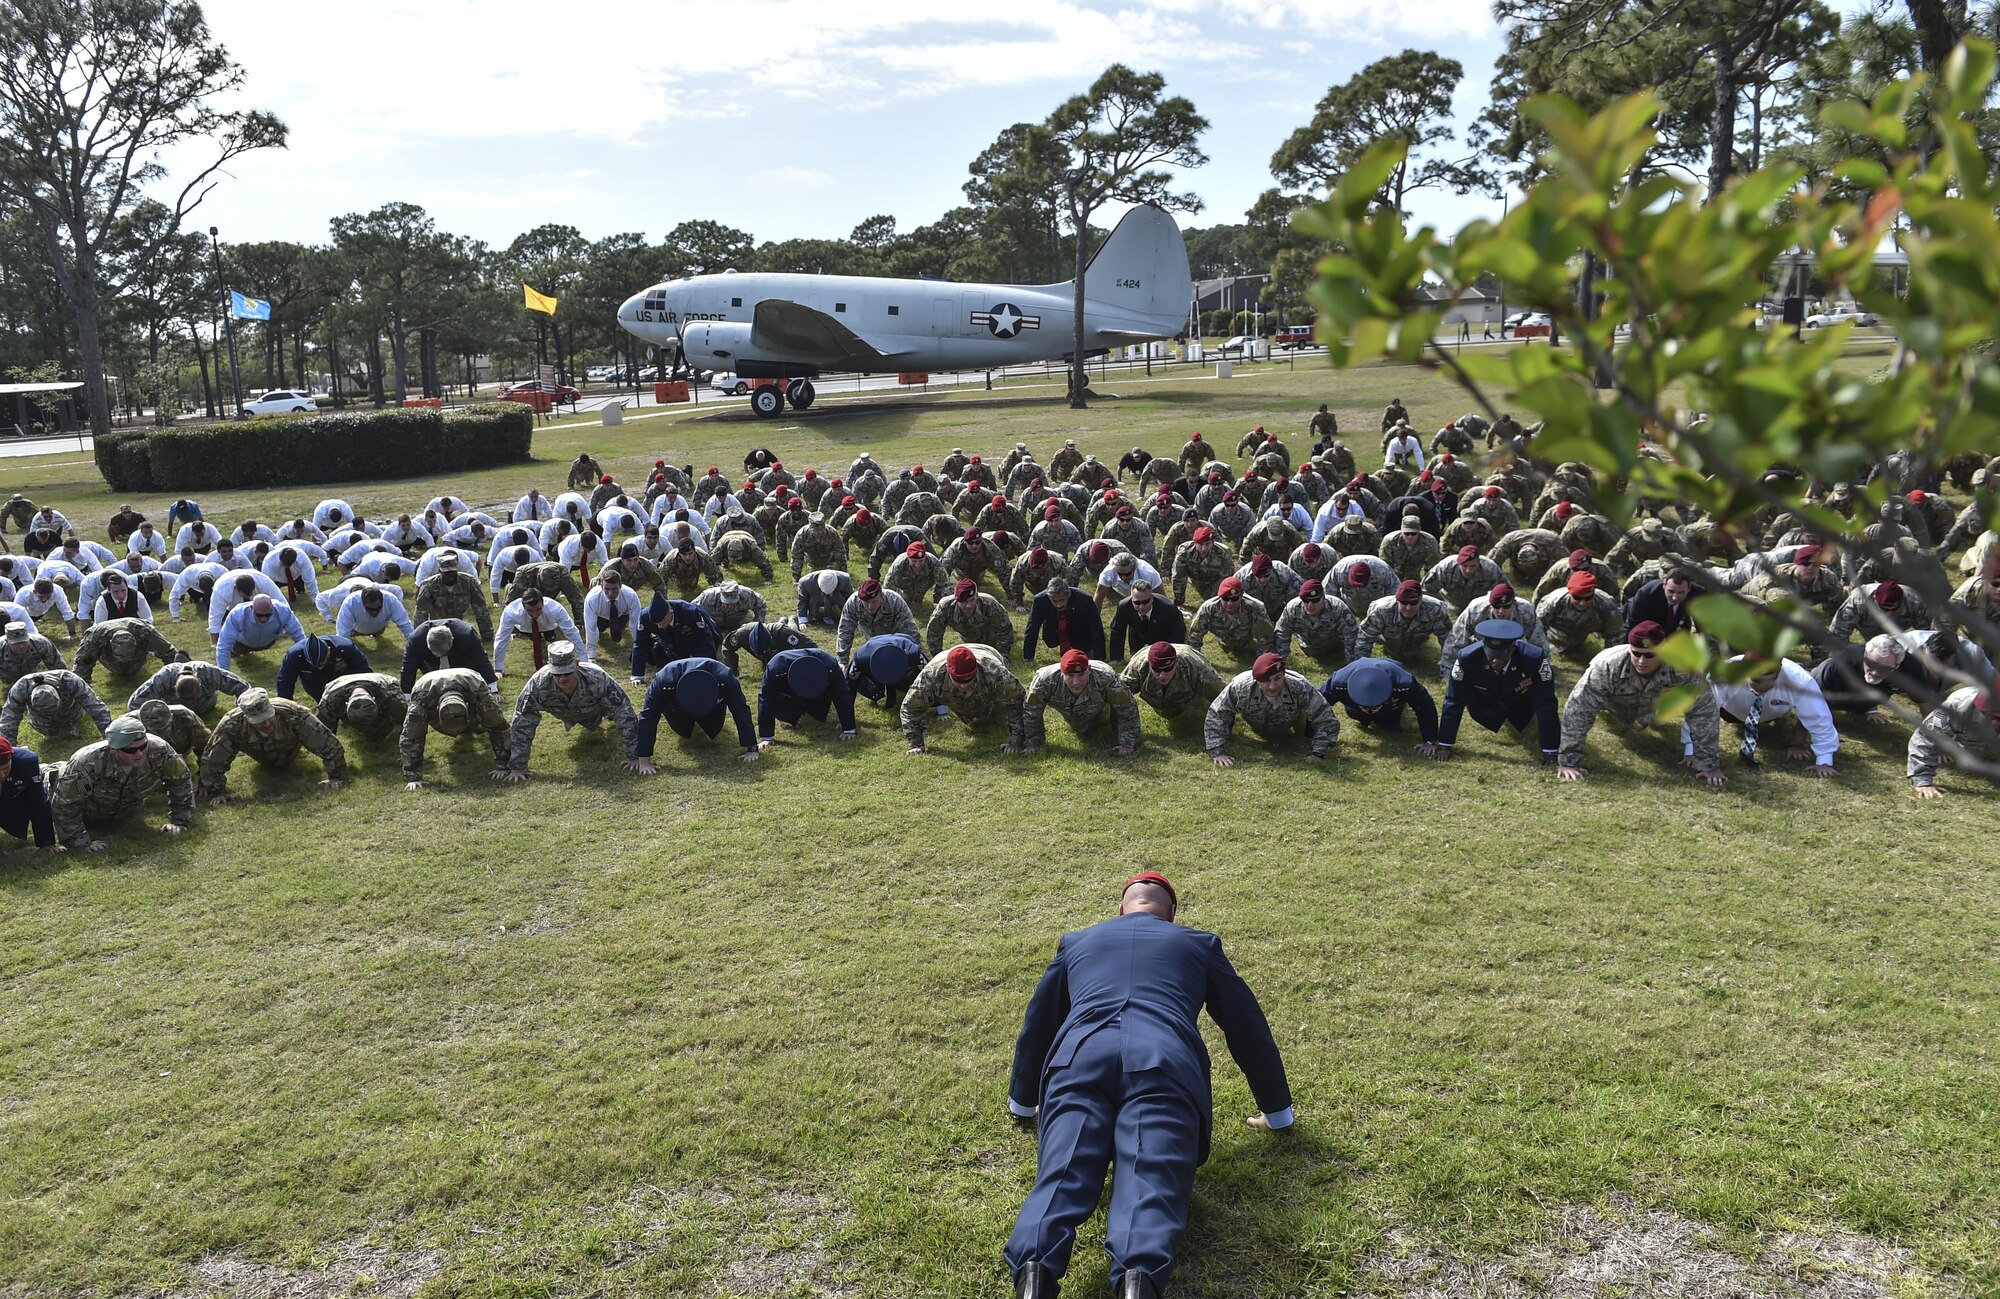 Col. Michael E. Martin, the commander for the 24th Special Operations Wing, leads Airmen in "Memorial Pushups" honoring the fallen following a dual Air Force Cross ceremony, April 20, 2017, at Hurlburt Field, Fla. For the first time in Air Force history, two Airmen were simultaneously awarded the service’s highest medal for valorous action in combat. Master Sgt. (Ret.) Keary Miller, a retired Special Tactics pararescueman from the Air National Guard’s 123rd Special Tactics Squadron, and Chris Baradat, a combat controller since separated, both received Silver Star medals for their actions in combat, which were upgraded after a service-wide review. (U.S. Air Force photo by Senior Airman Ryan Conroy)